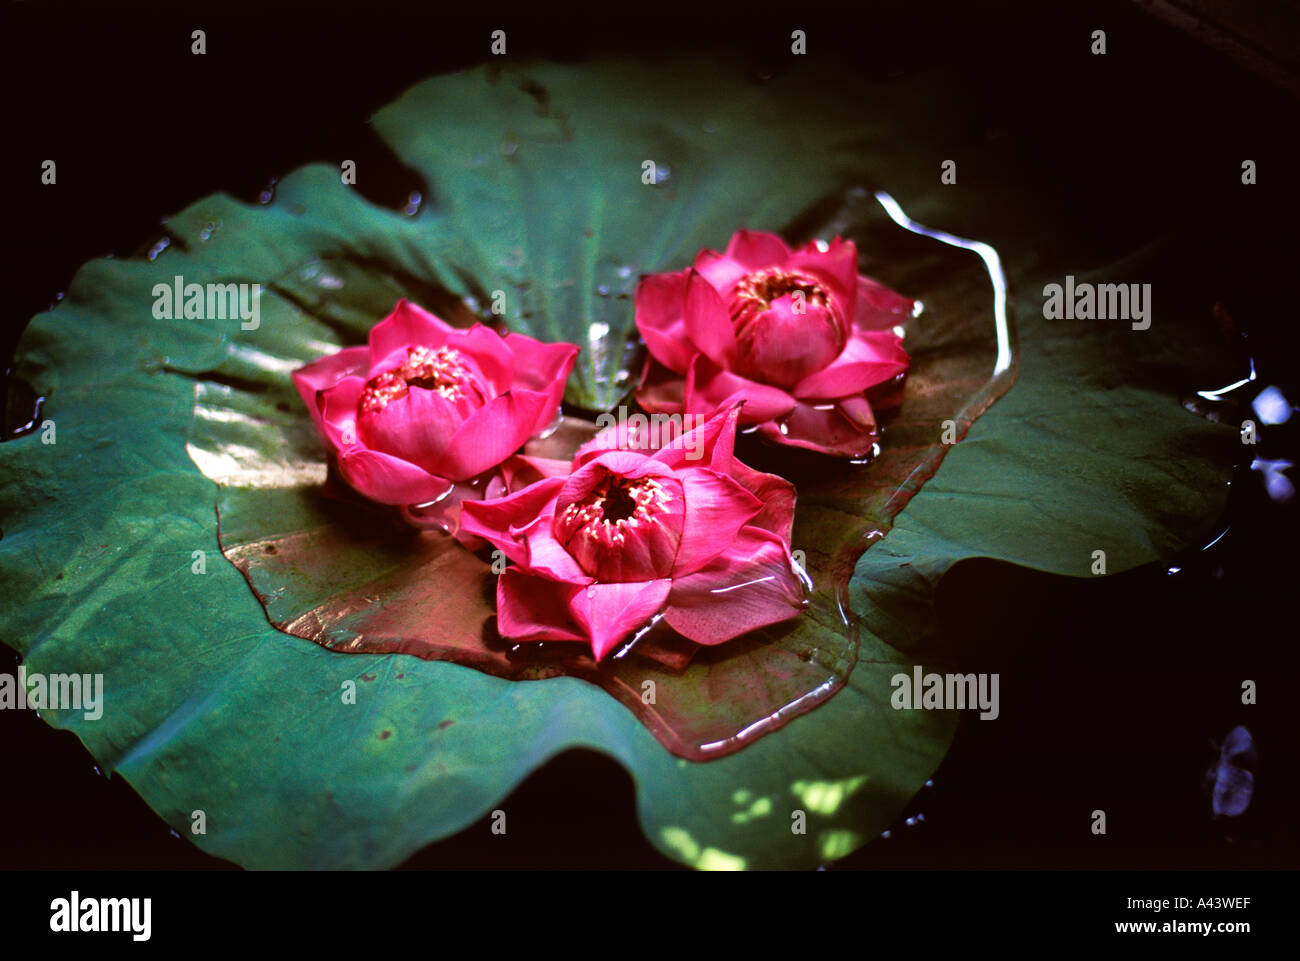 Lotus flowers on a floating leaf Stock Photo